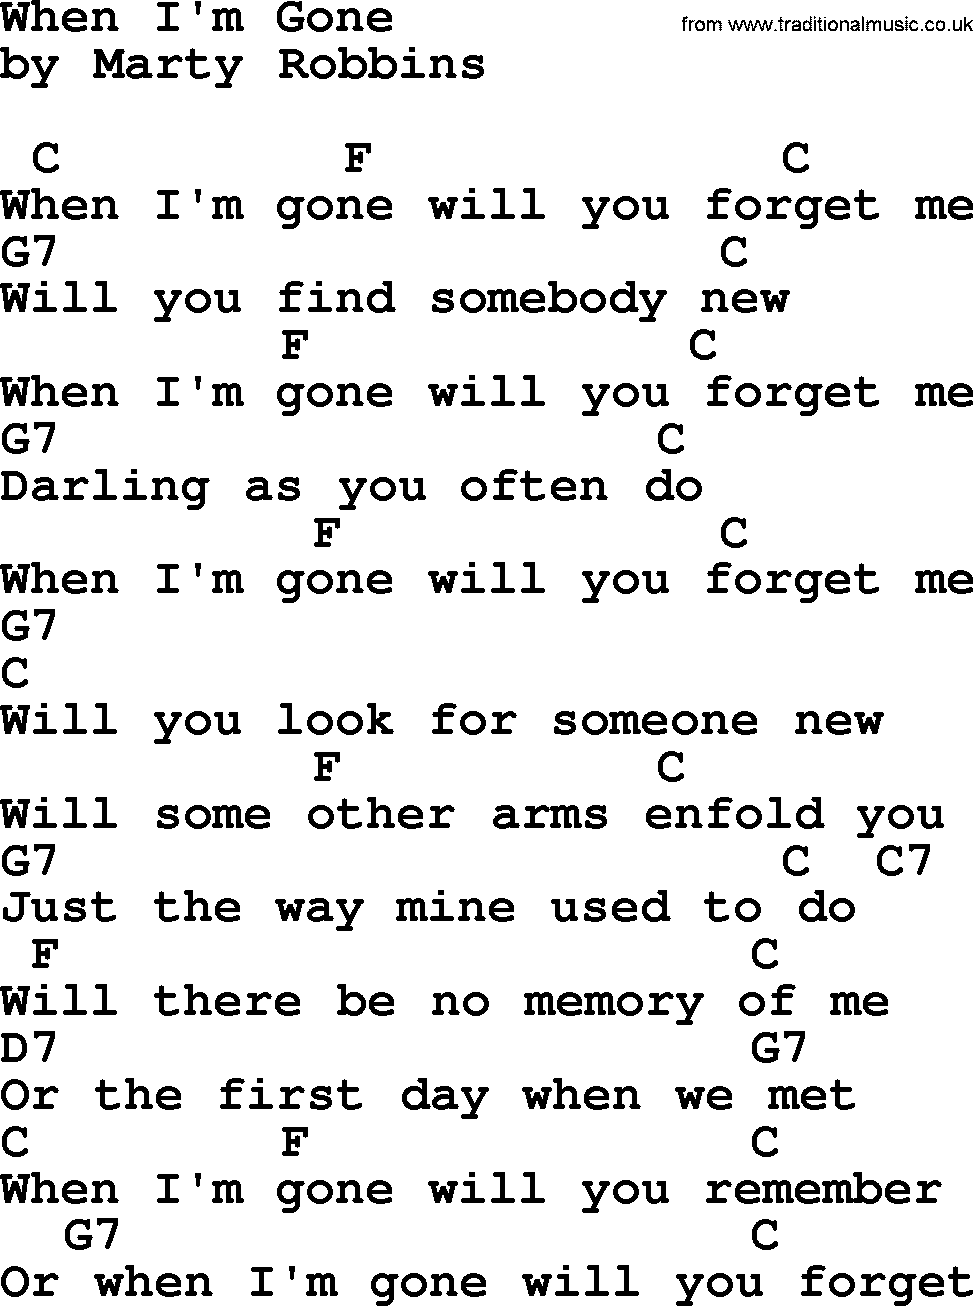 Marty Robbins song: When I'm Gone, lyrics and chords